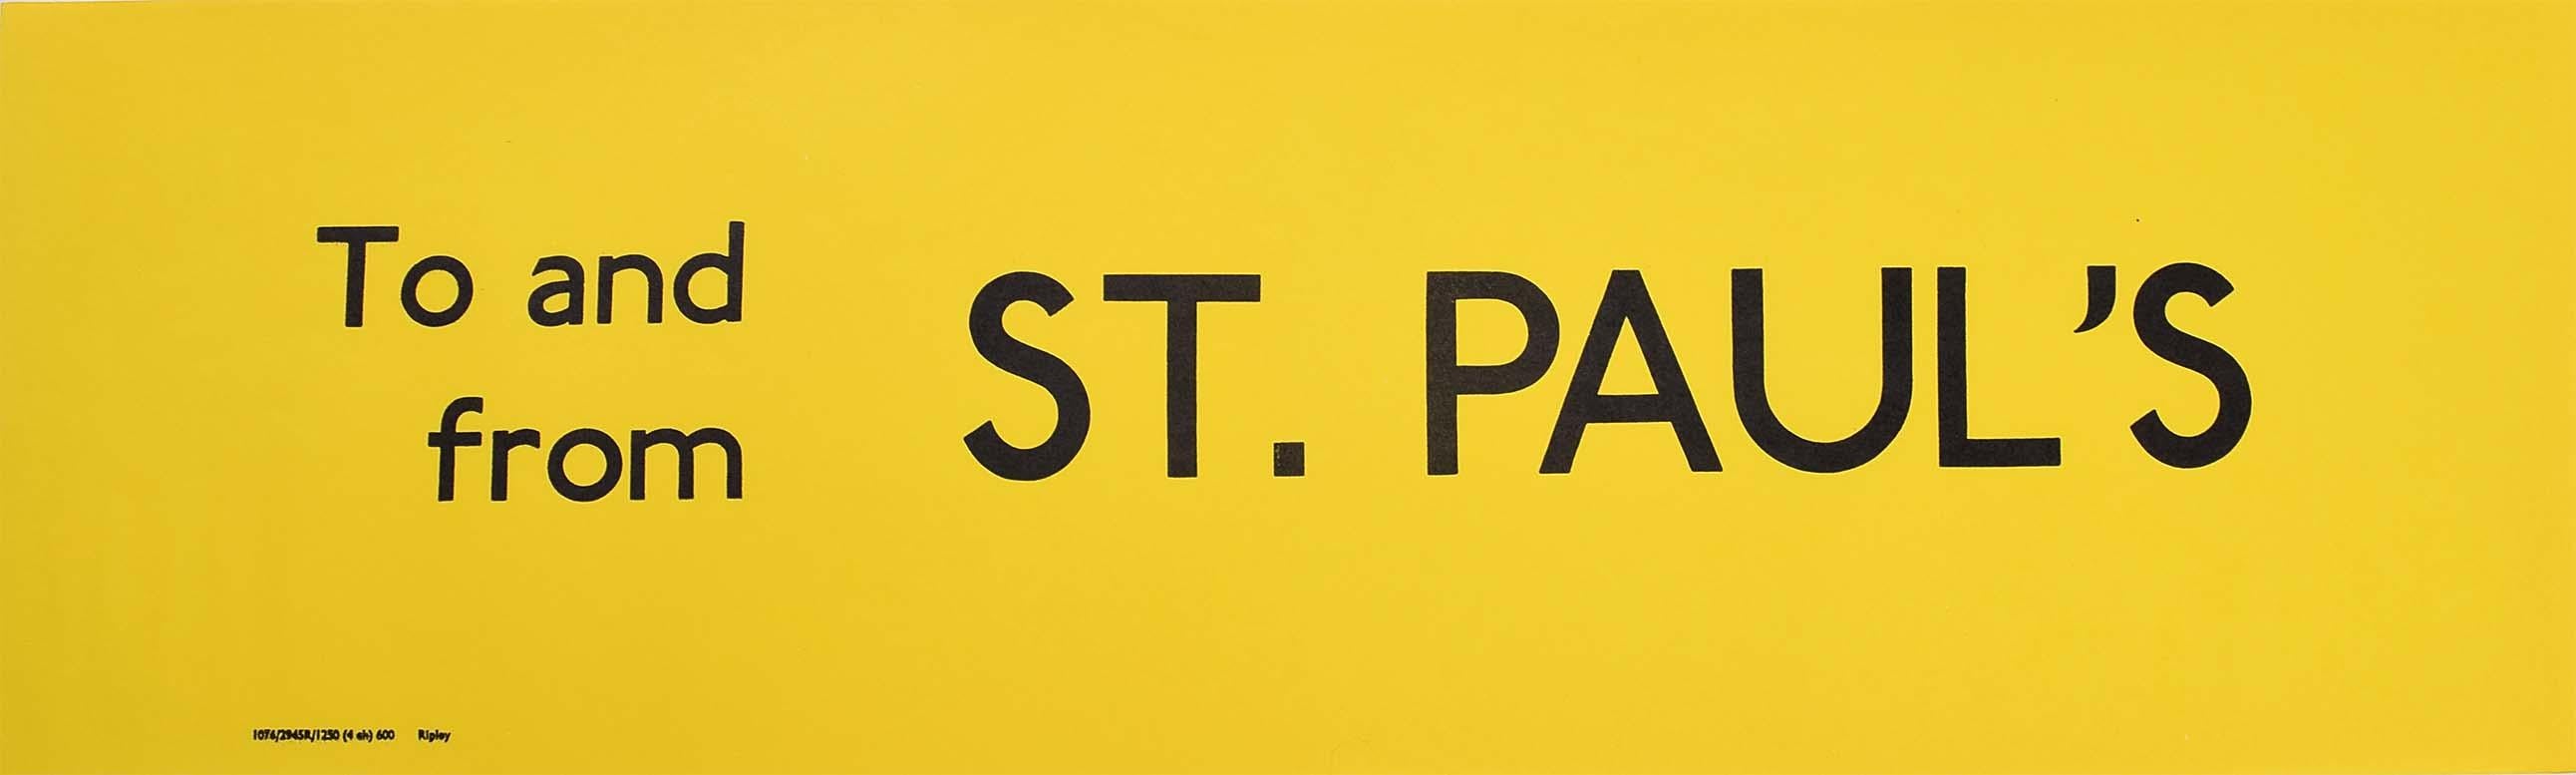 St. Paul's, London England Routemaster Bus sign c. 1970 transport poster